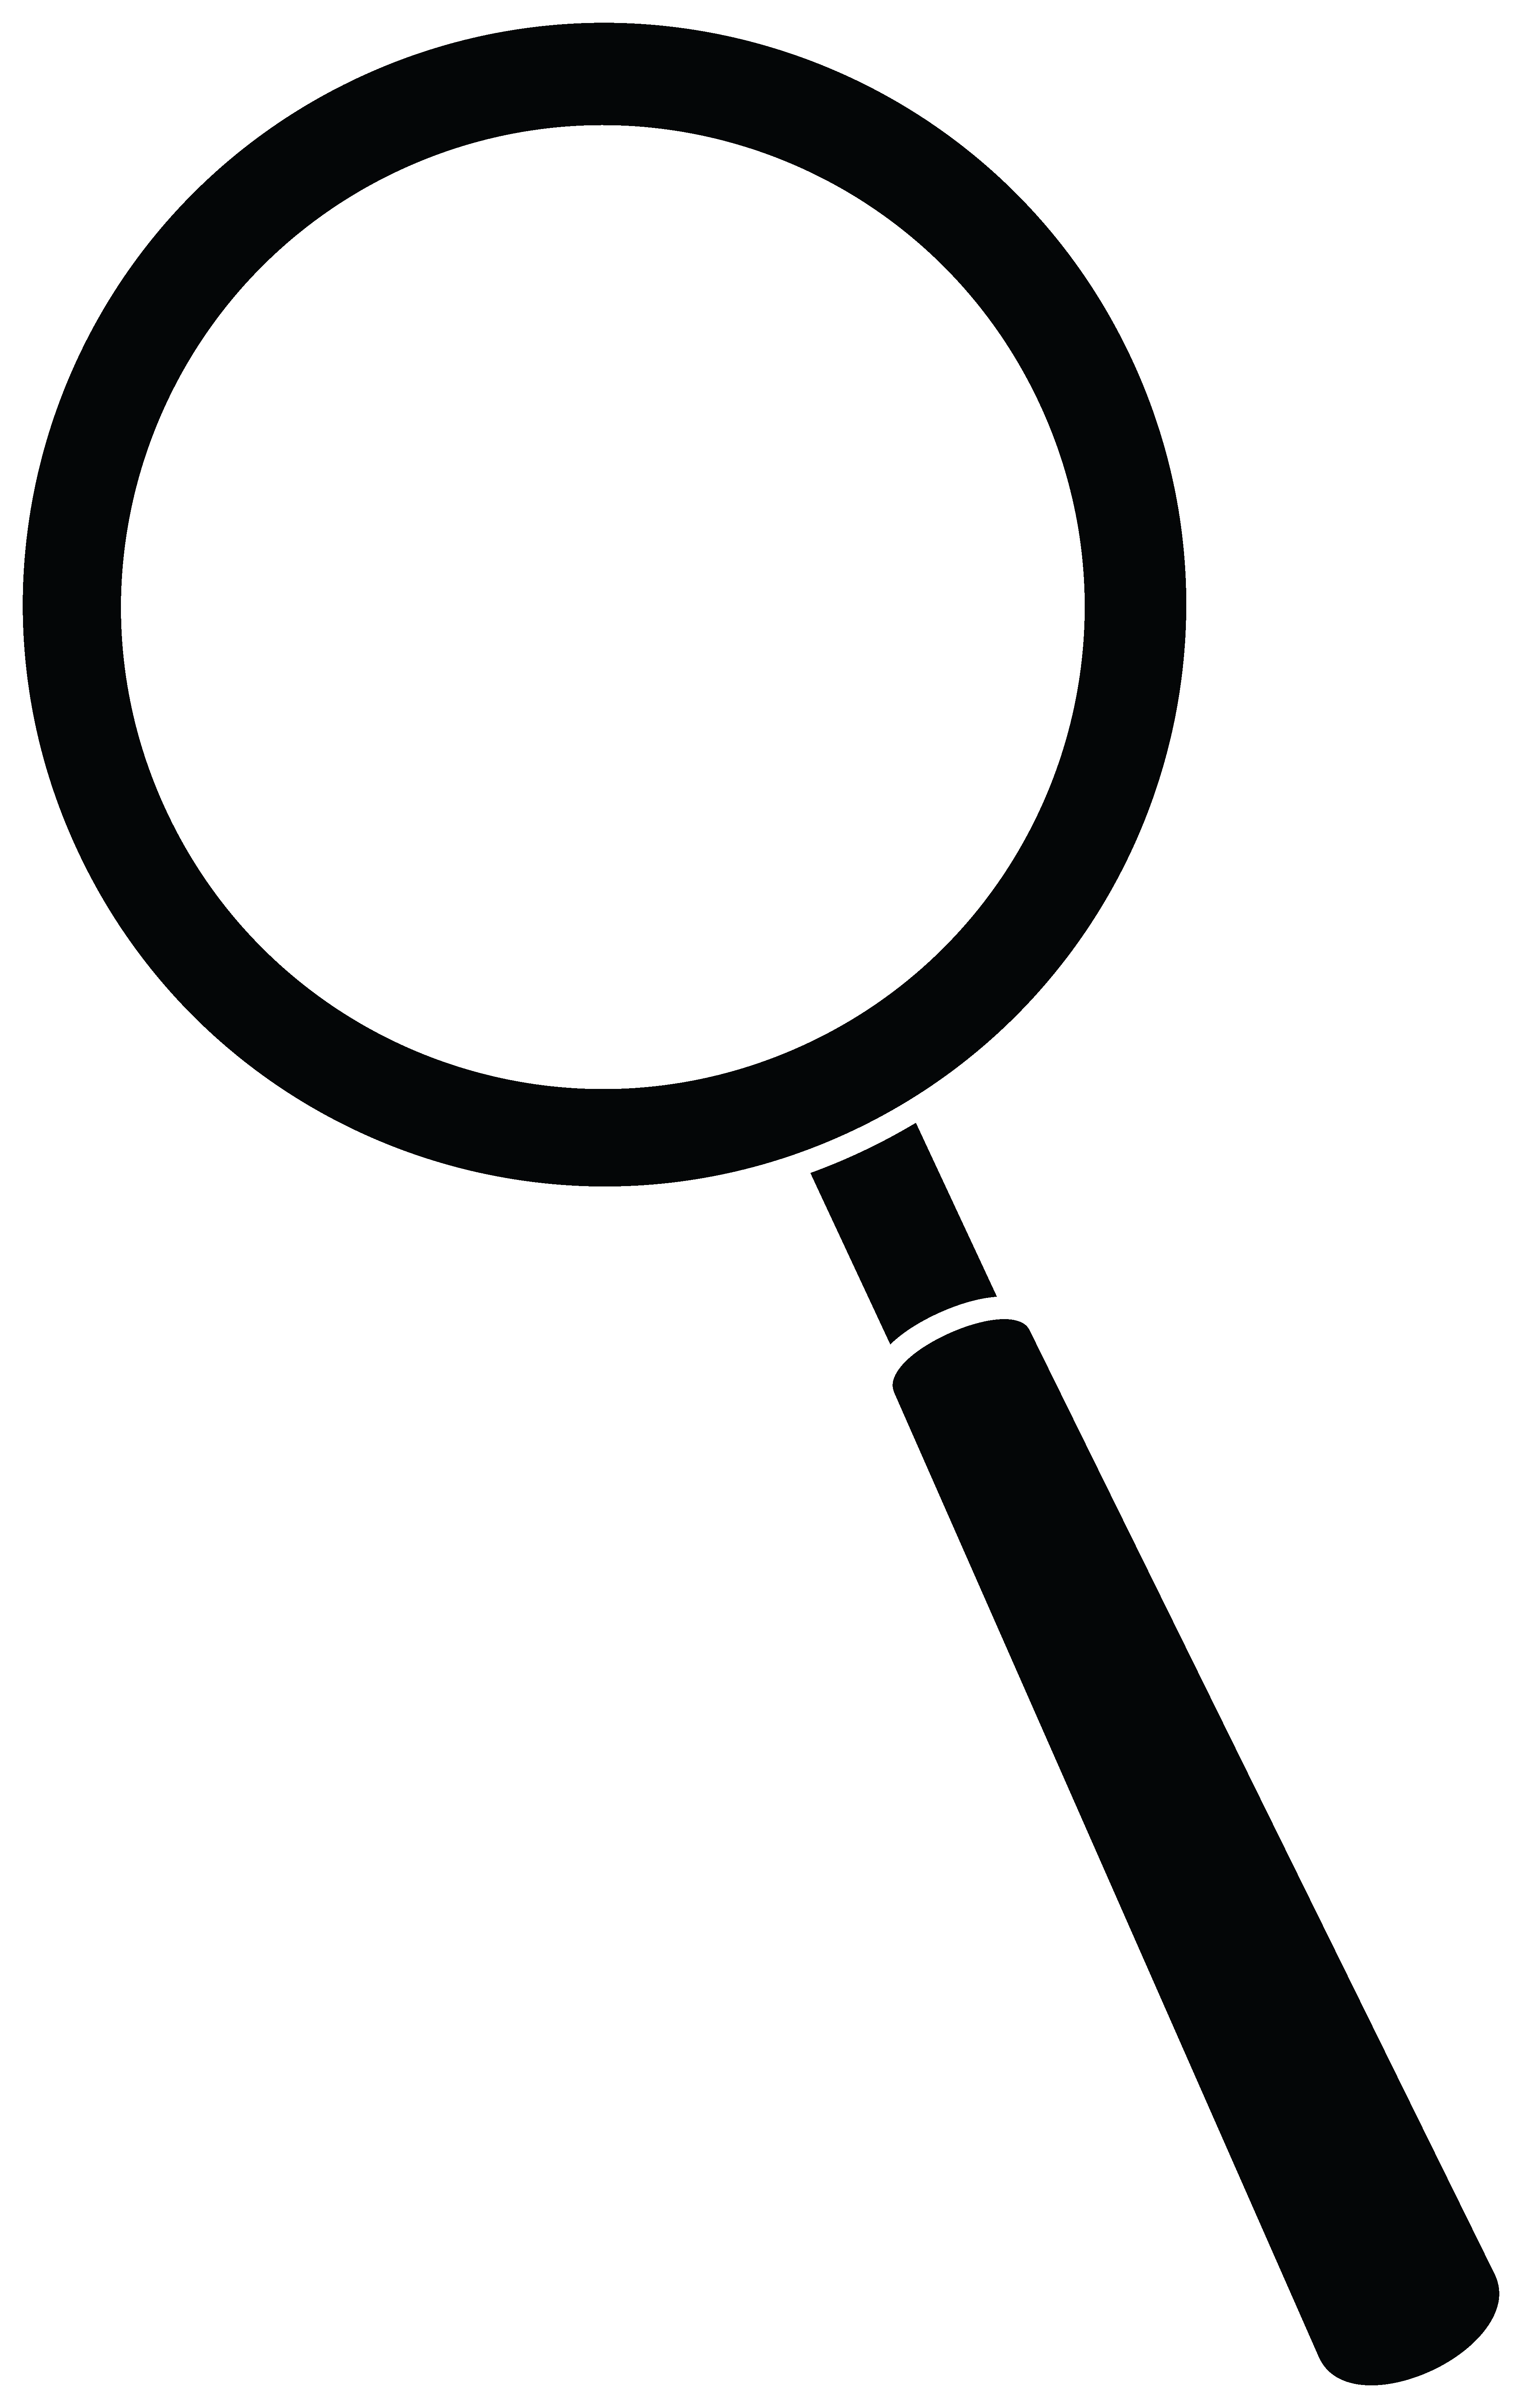 free clipart images magnifying glass - photo #13